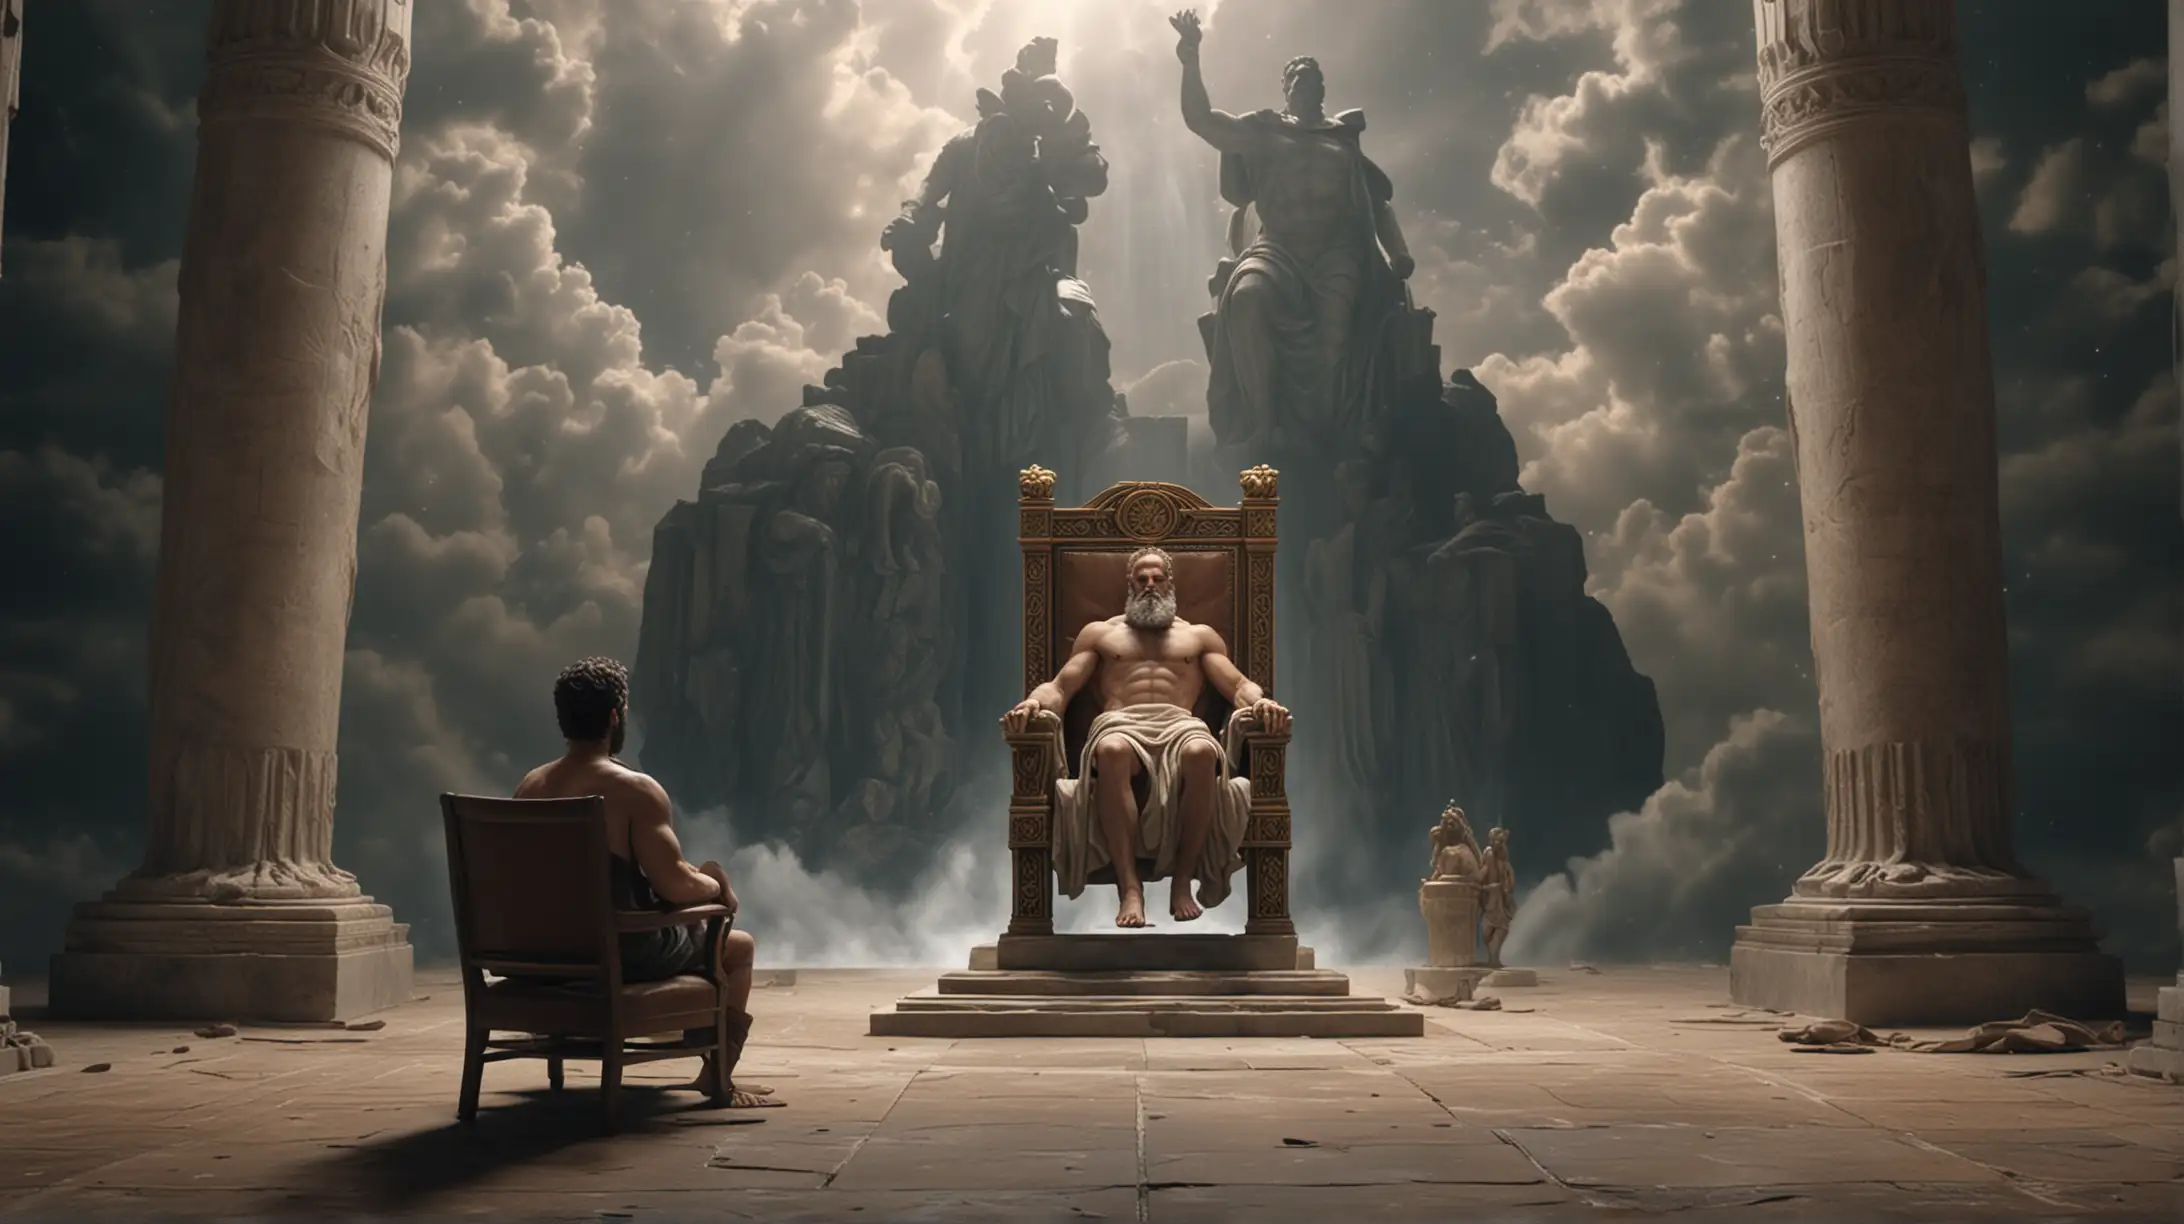 hyper realistic wide shot of a small man in the distance approaching a Zeus looking god sitting in a big chair
